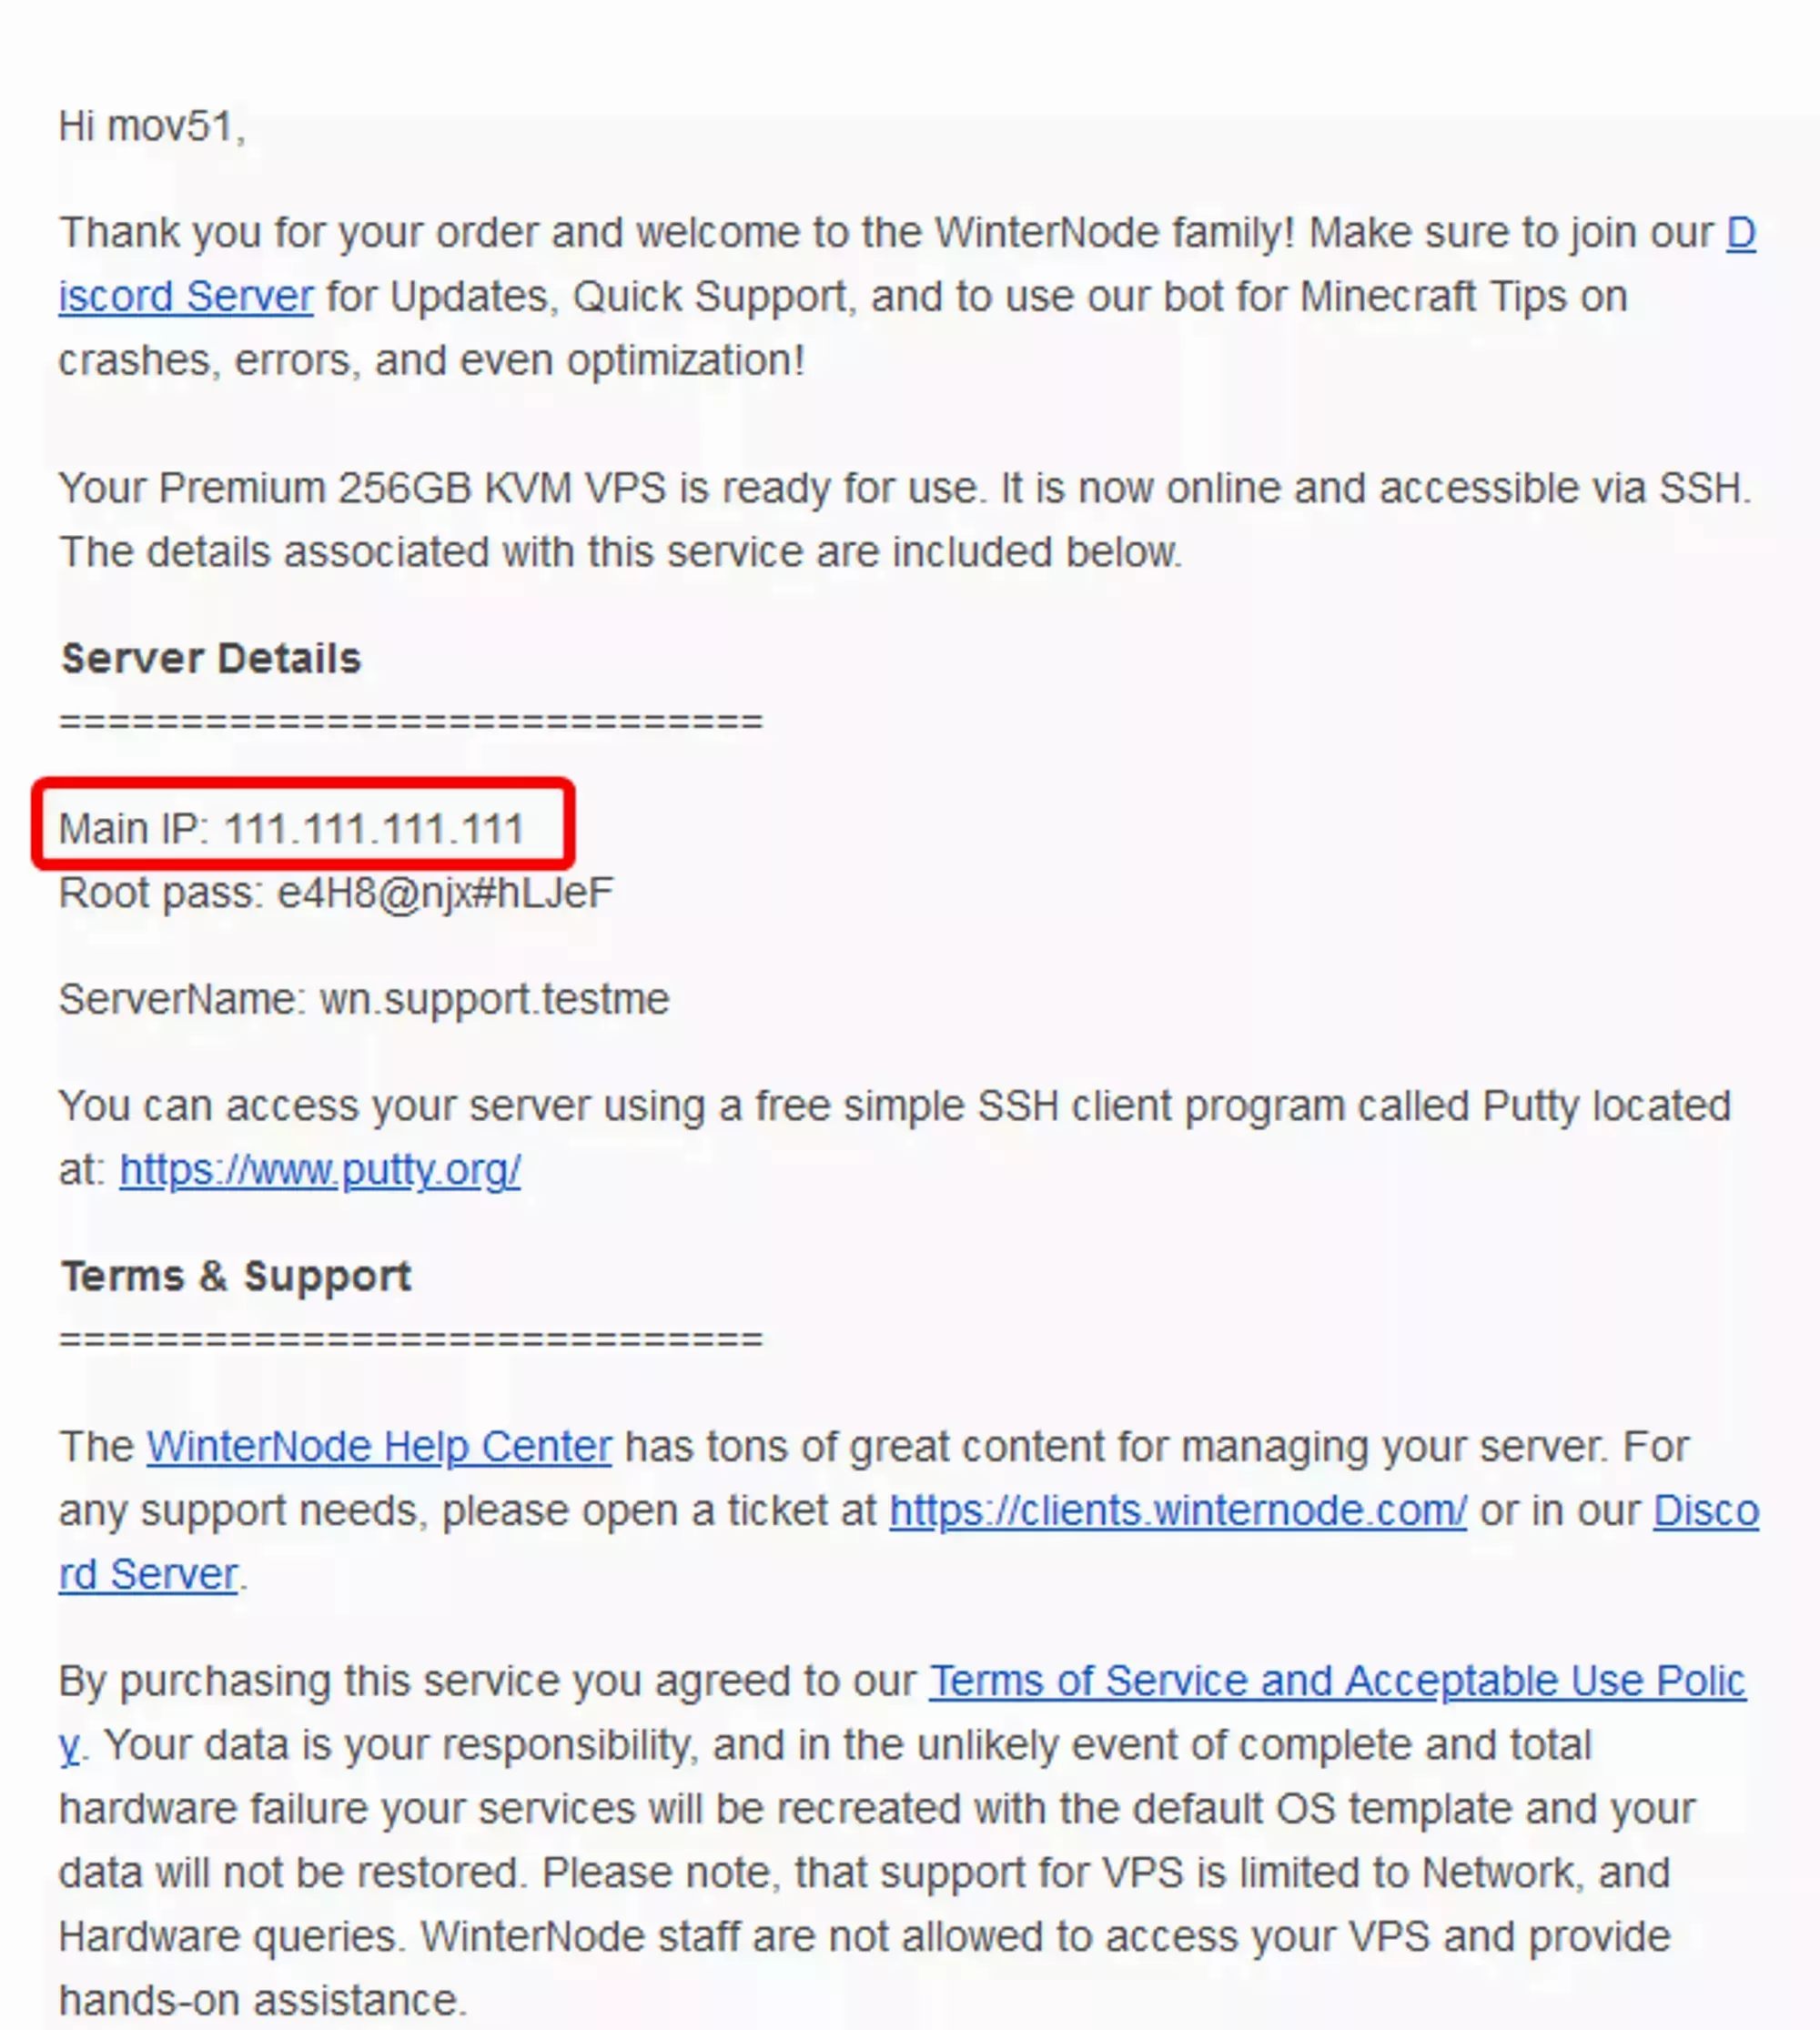 The VPS registration email received when you purchase a new VPS with the IP Address highlighted out of the Server Details section